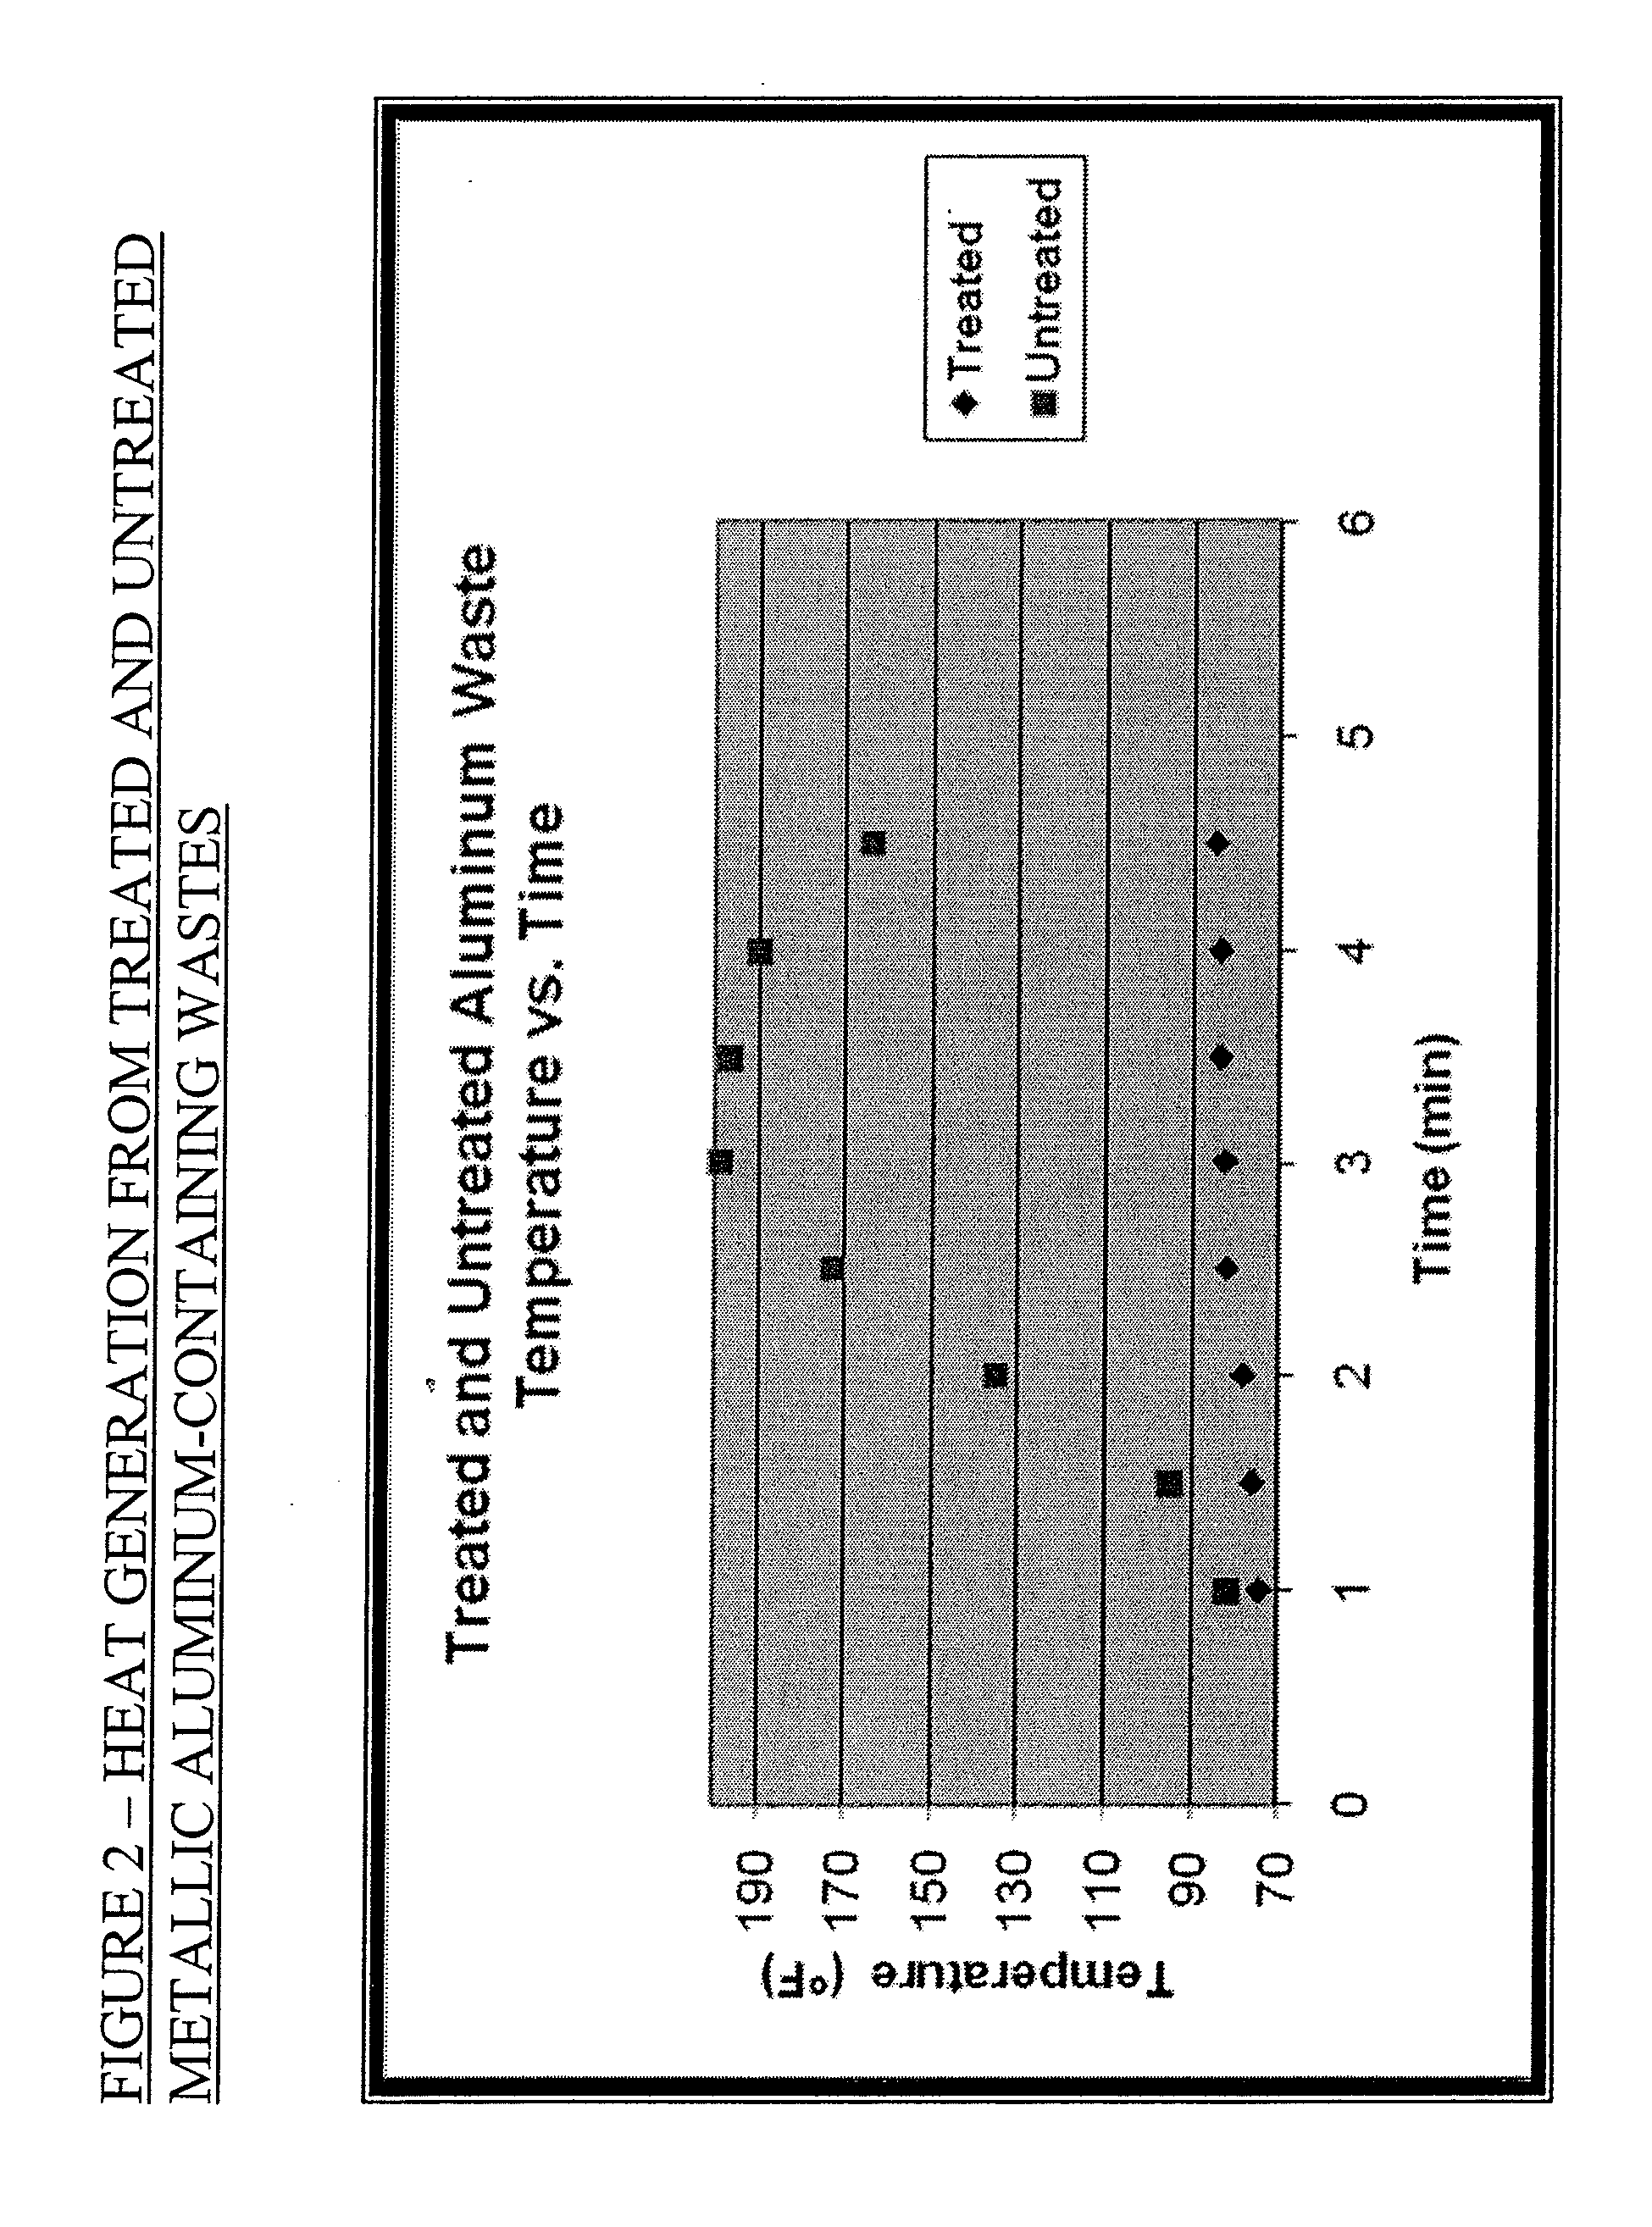 Method for Stabilization and/or Fixation of Leachable Metals